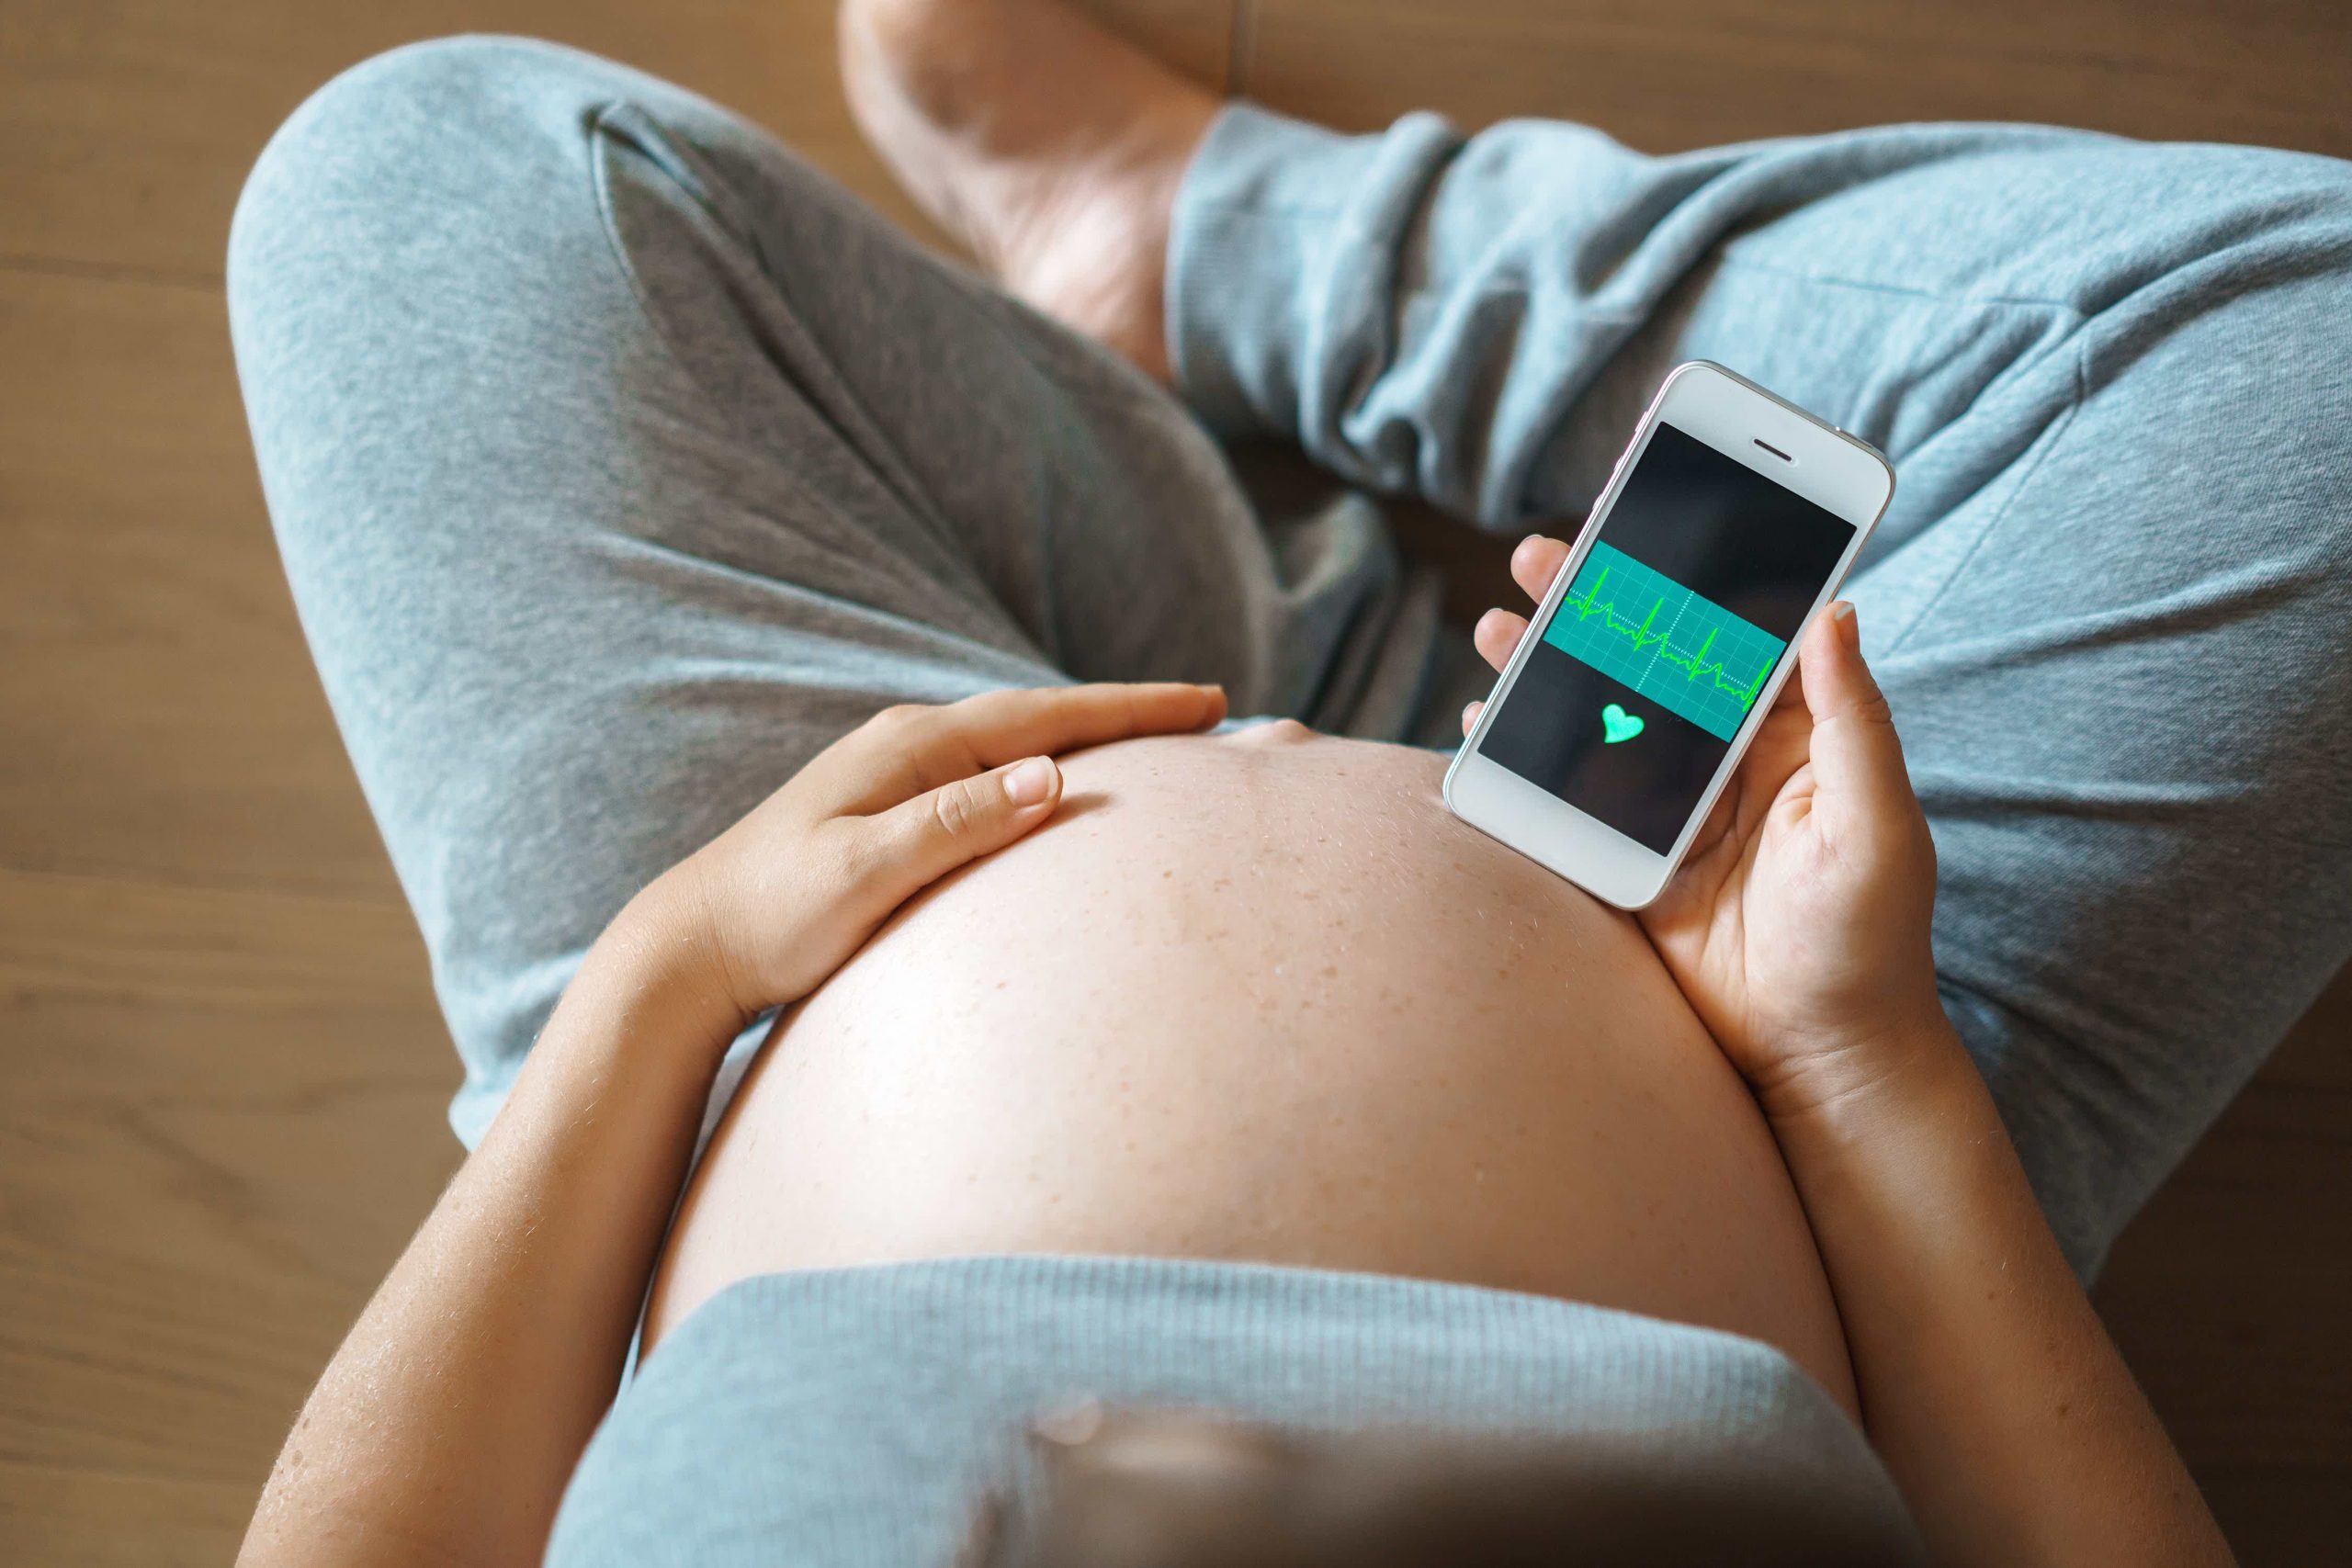 Applications to Listen to the Baby's Heart on the Cell Phone